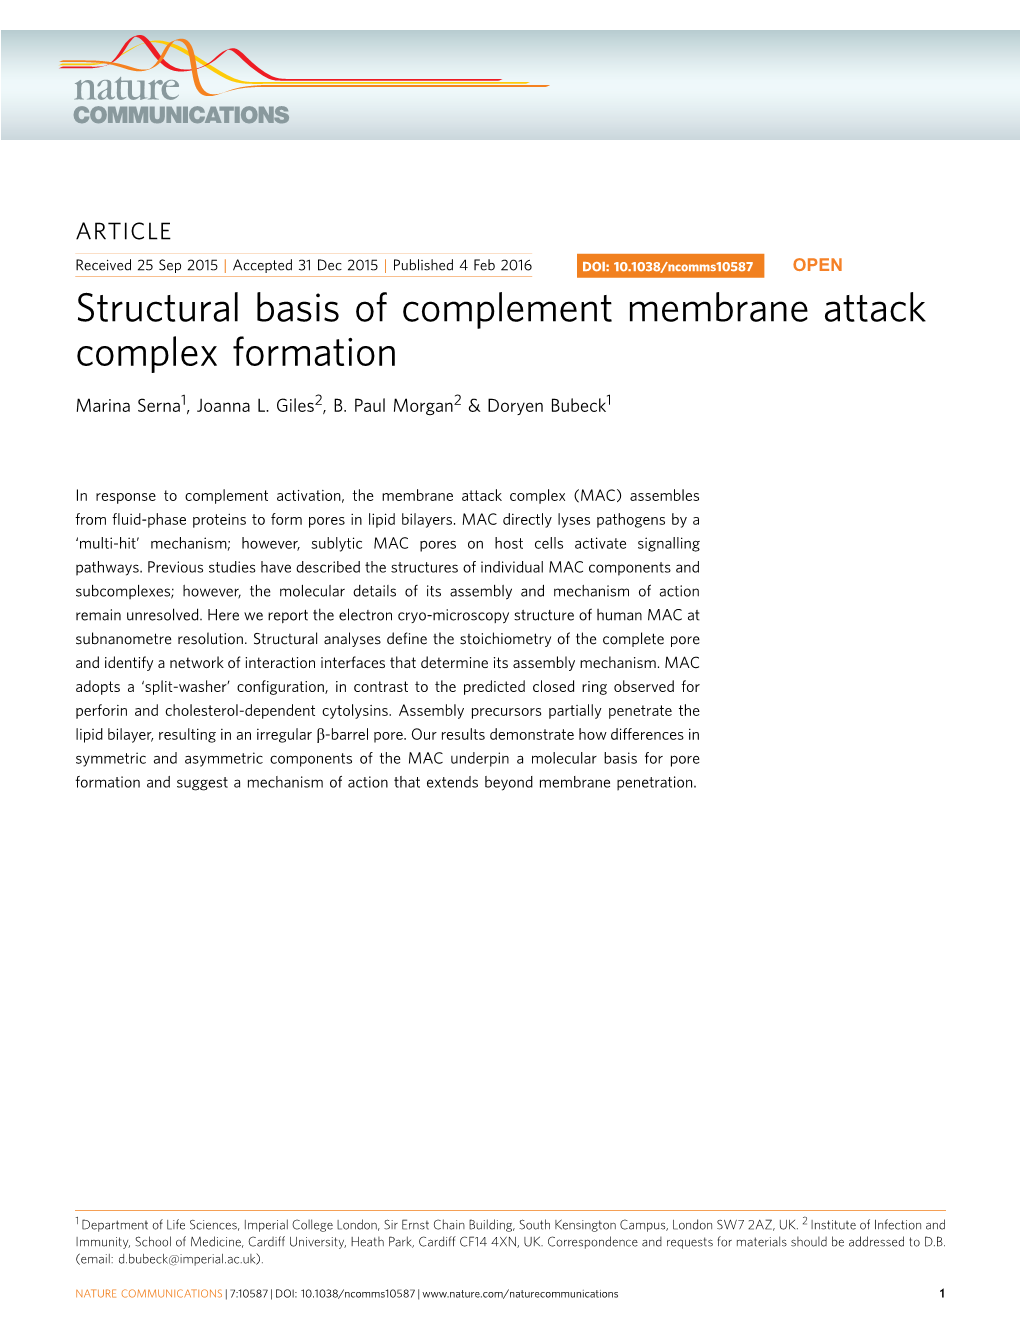 Structural Basis of Complement Membrane Attack Complex Formation